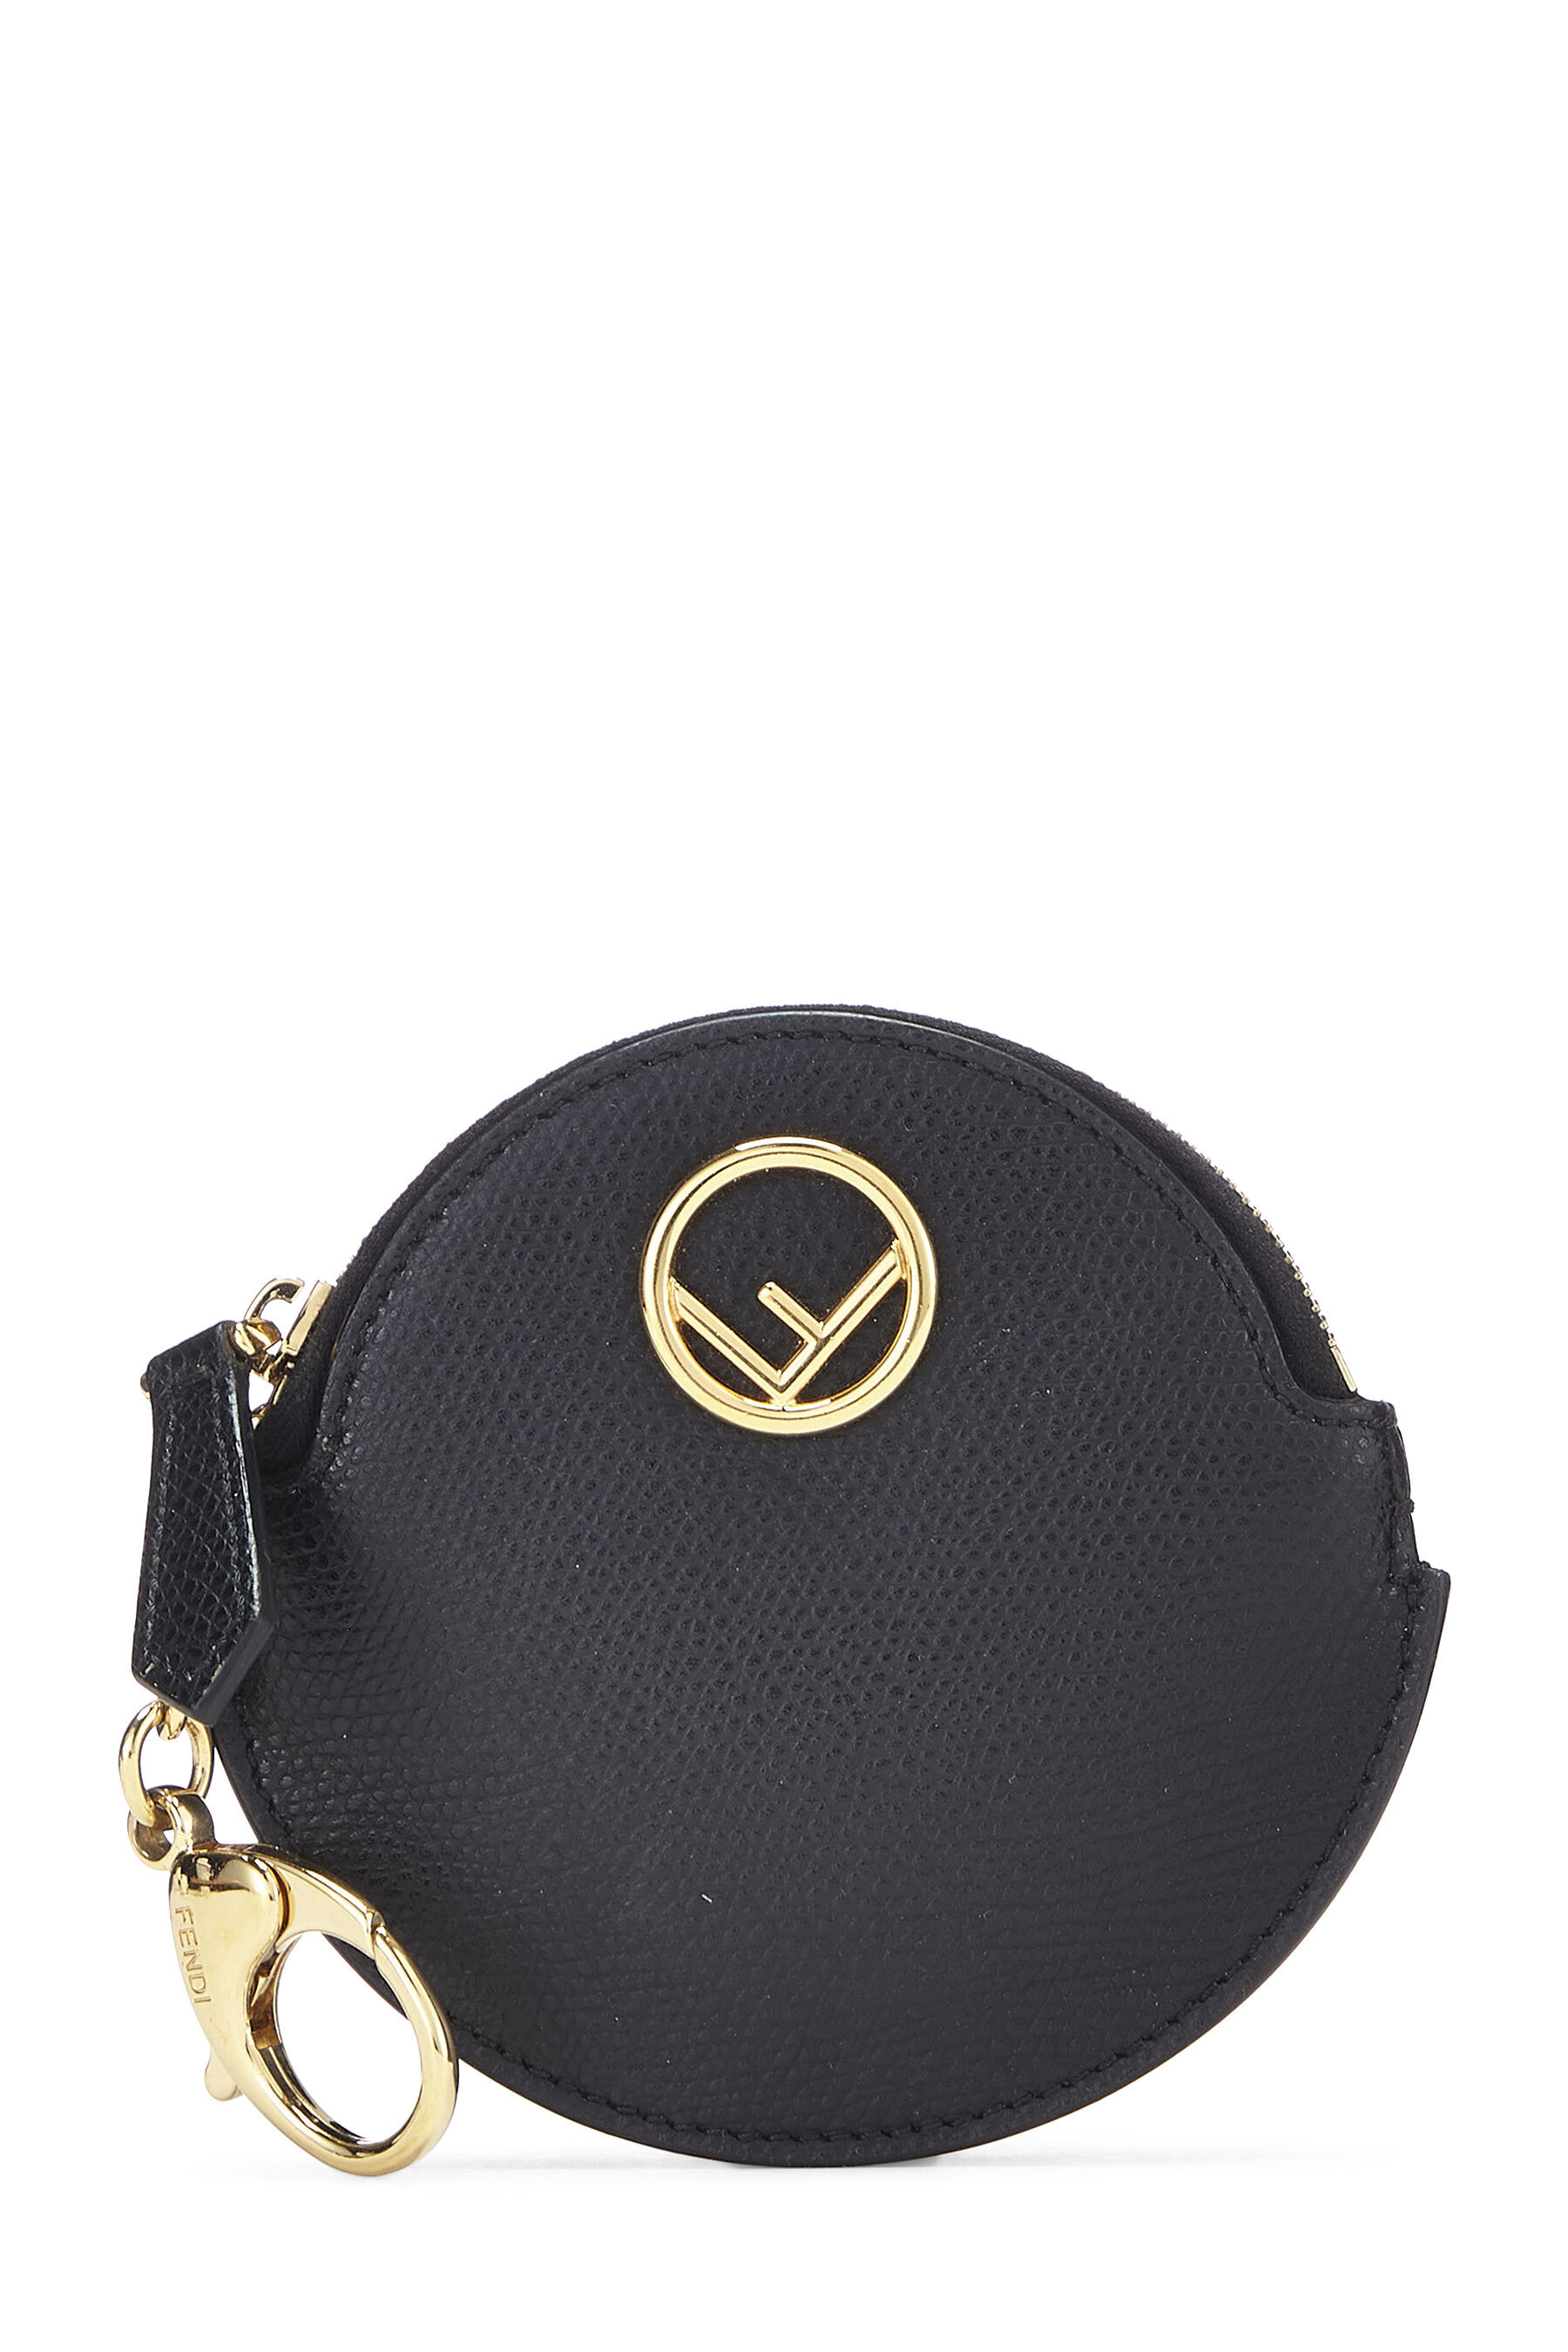 Buy KLEIO Black Quilted Round Coin Pouch | Shoppers Stop